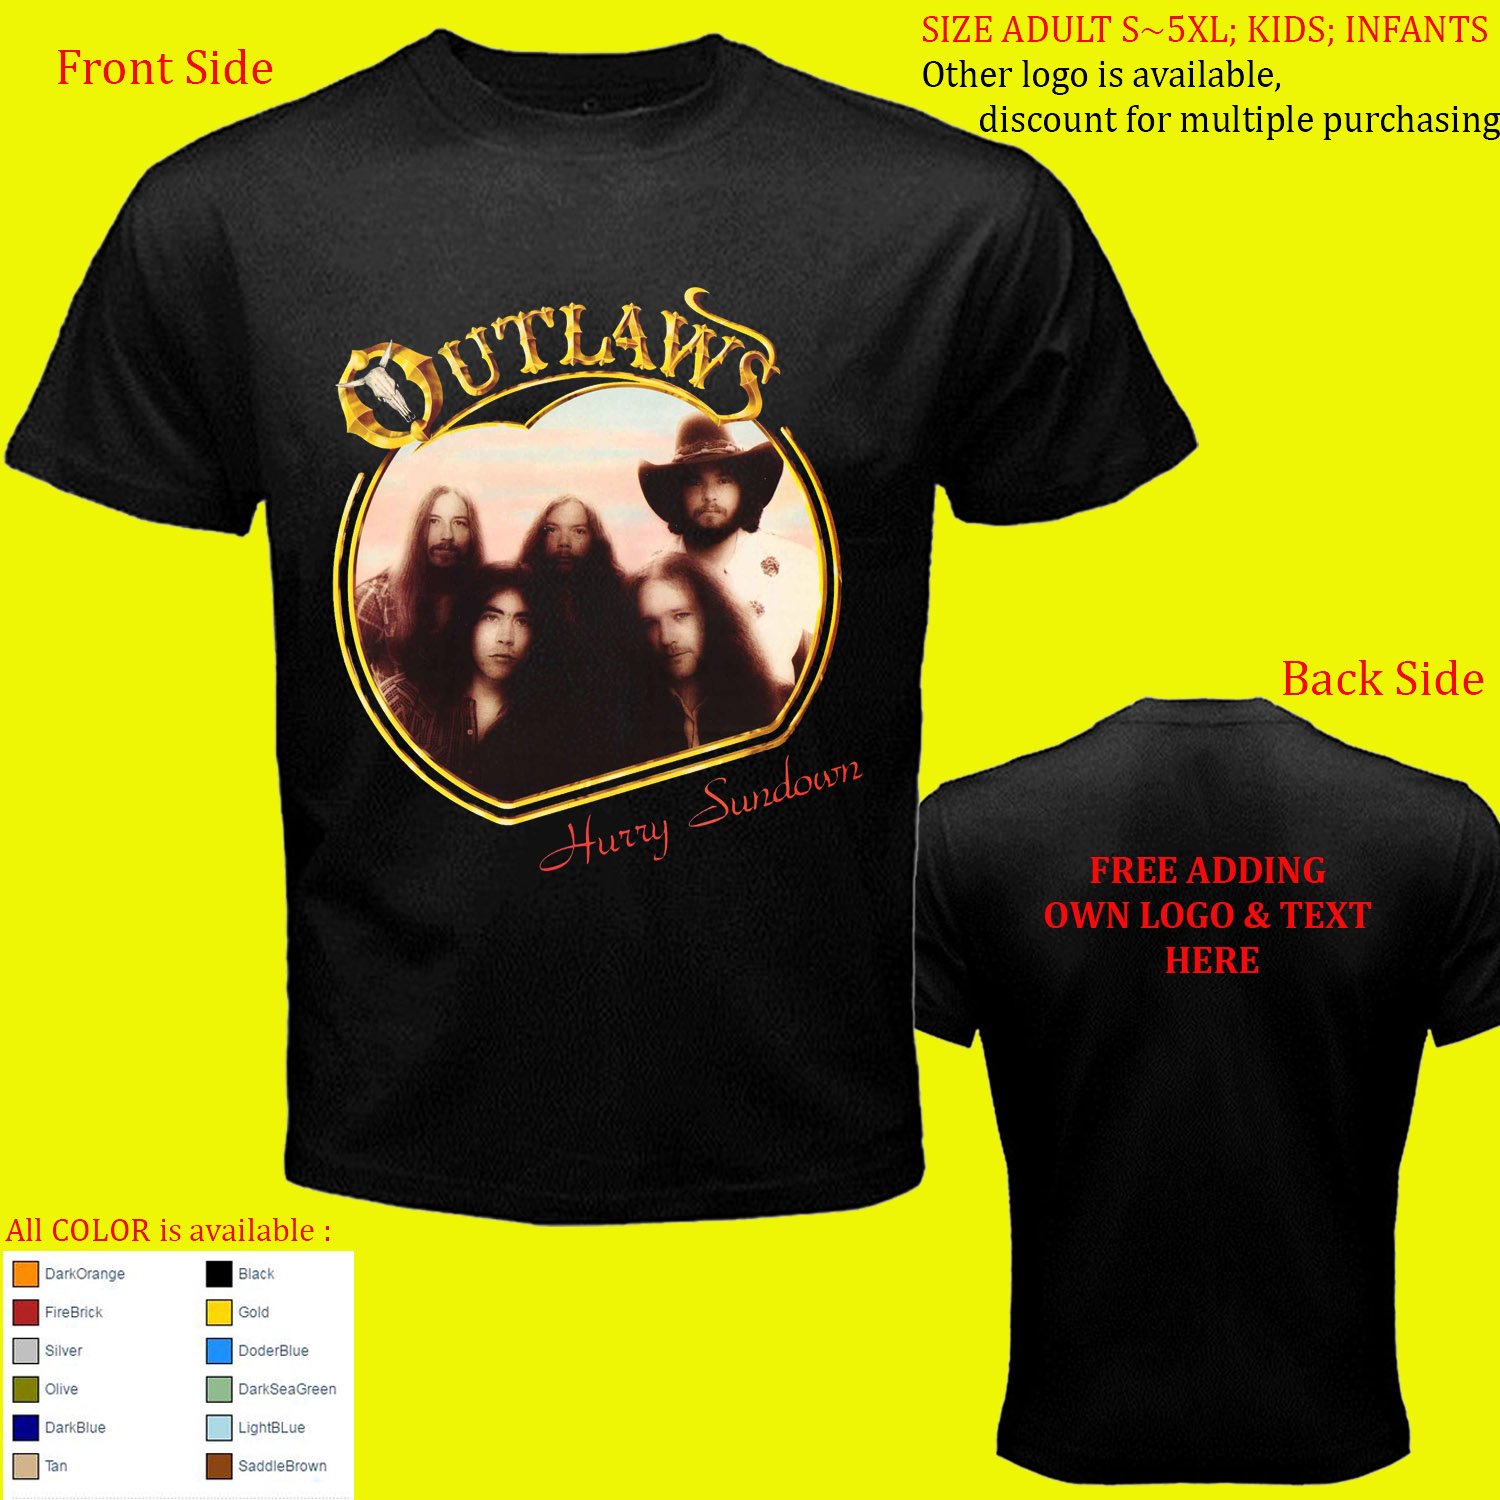 3 The Outlaws band album tour T-shirt All size Adult S-5XL Youth Babies